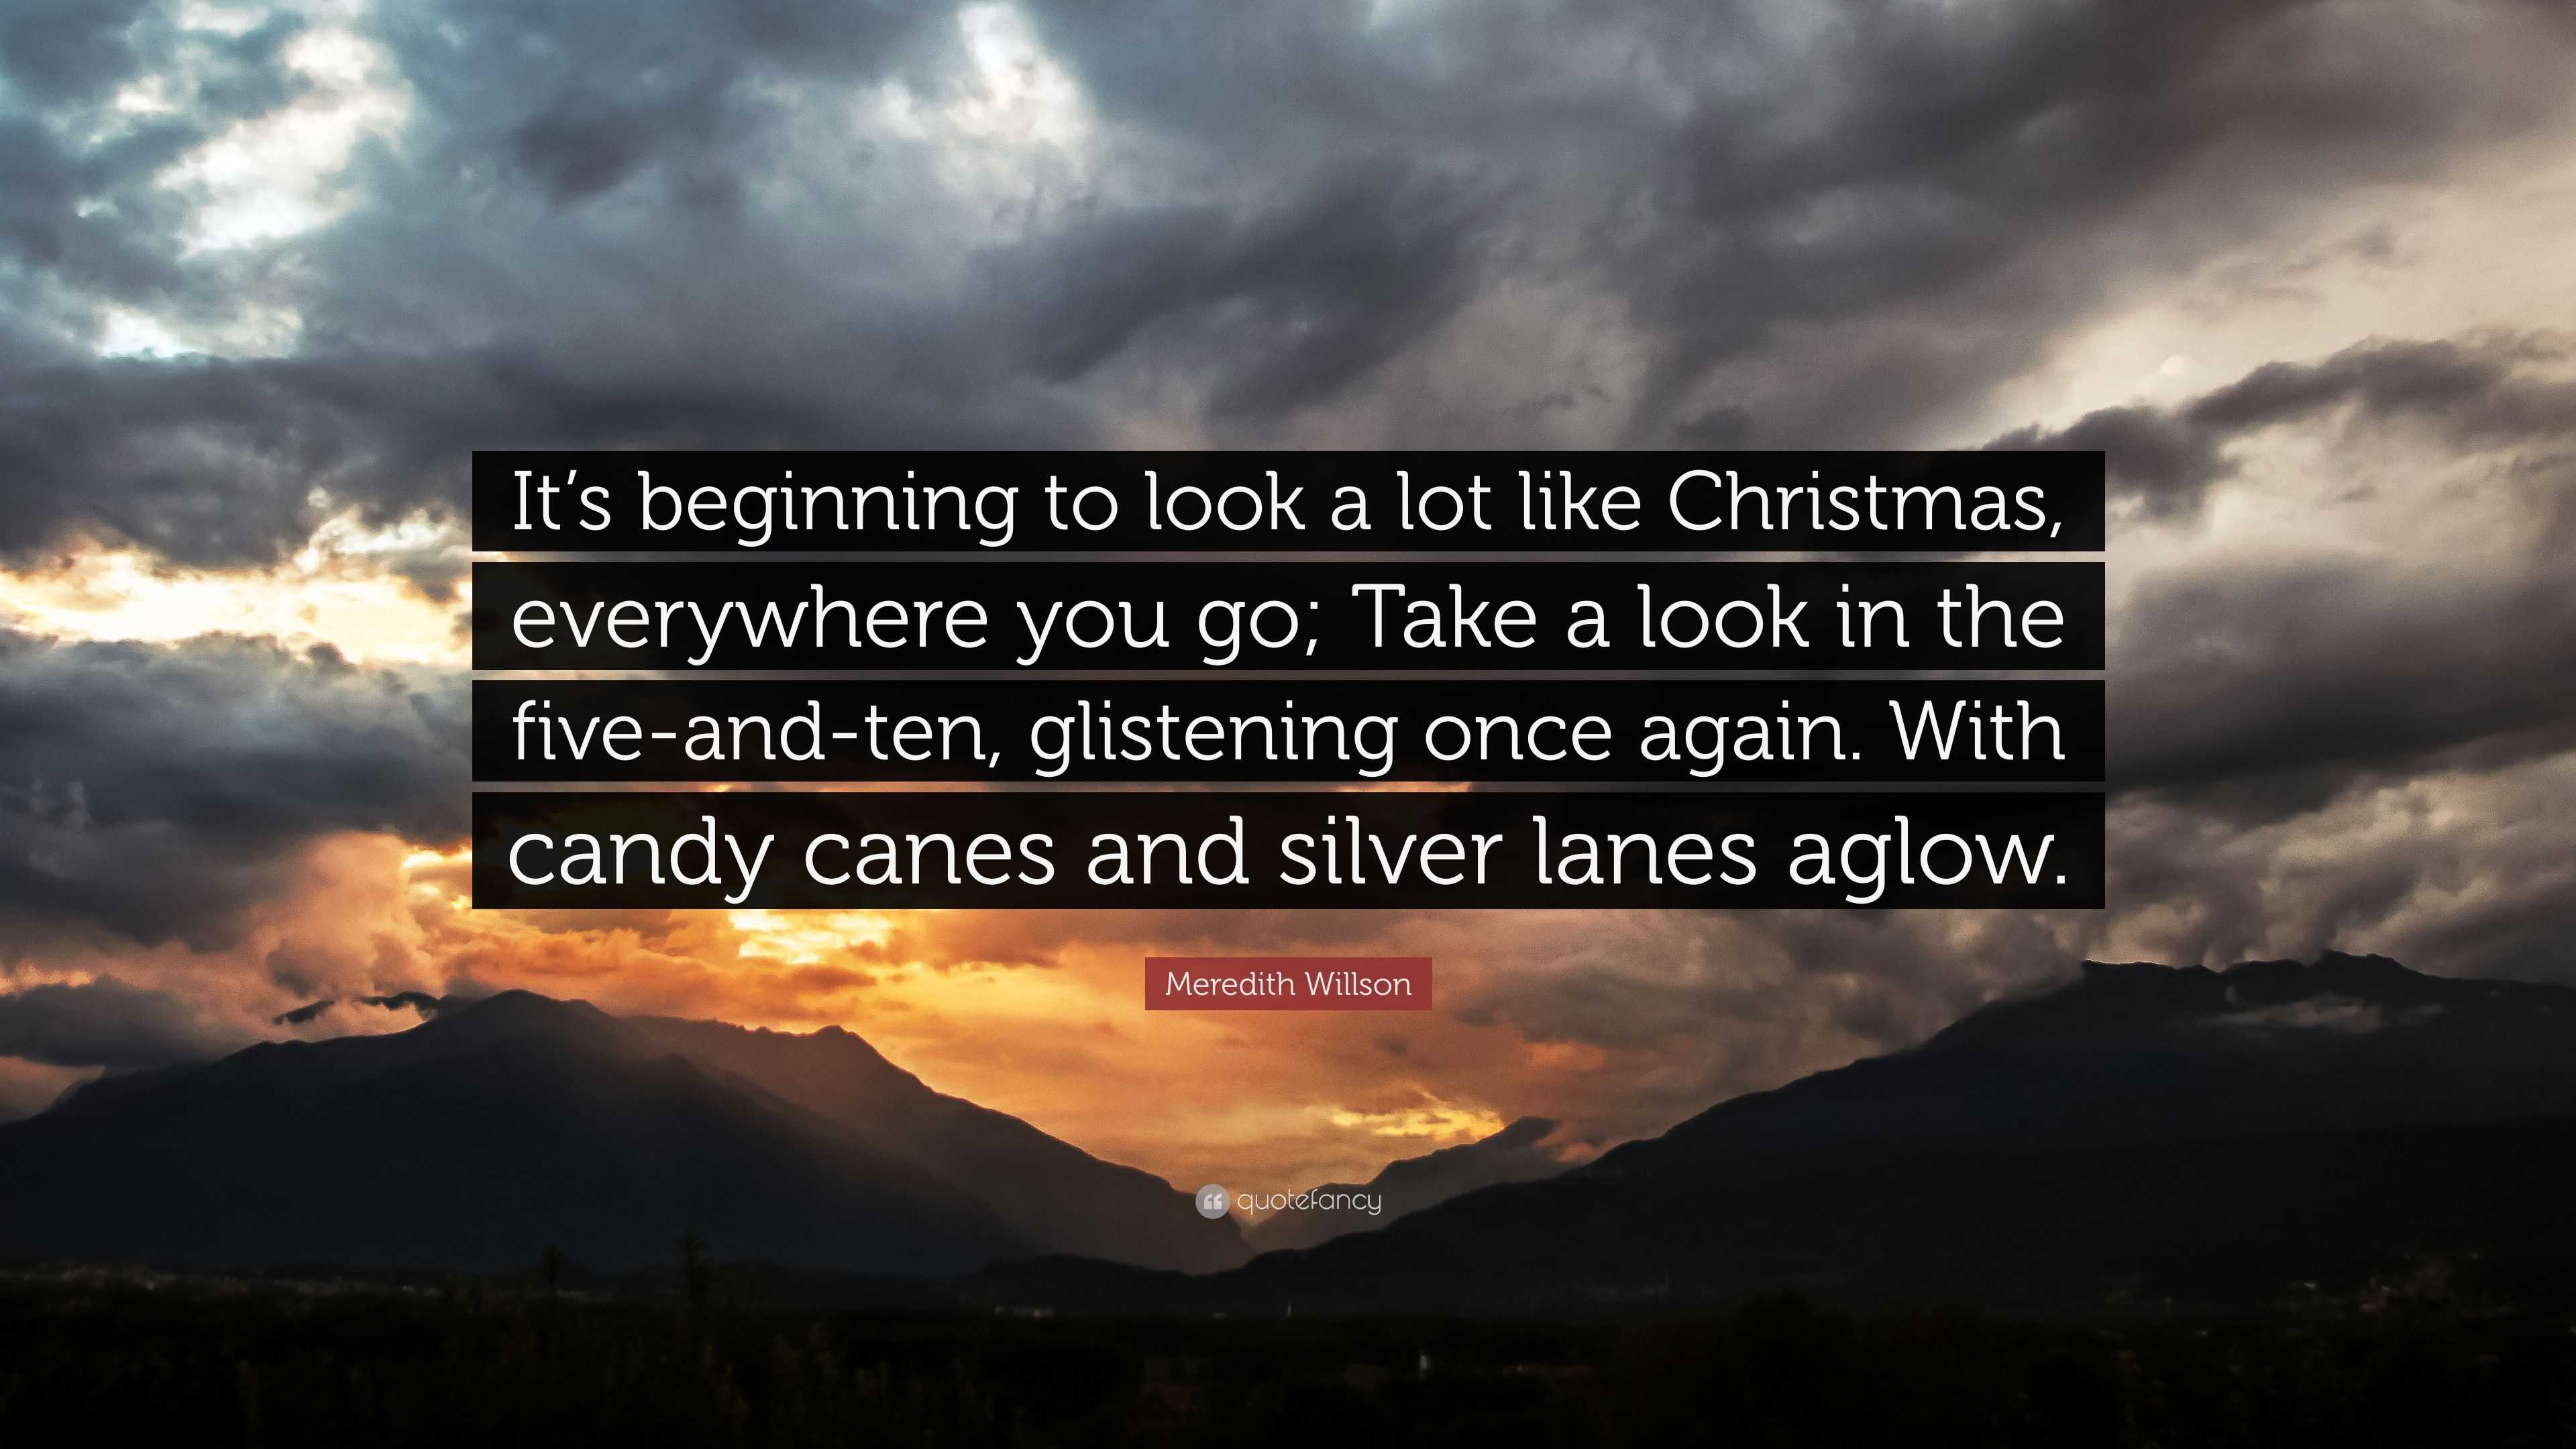 Meredith Willson Quote: “It’s beginning to look a lot like Christmas ...